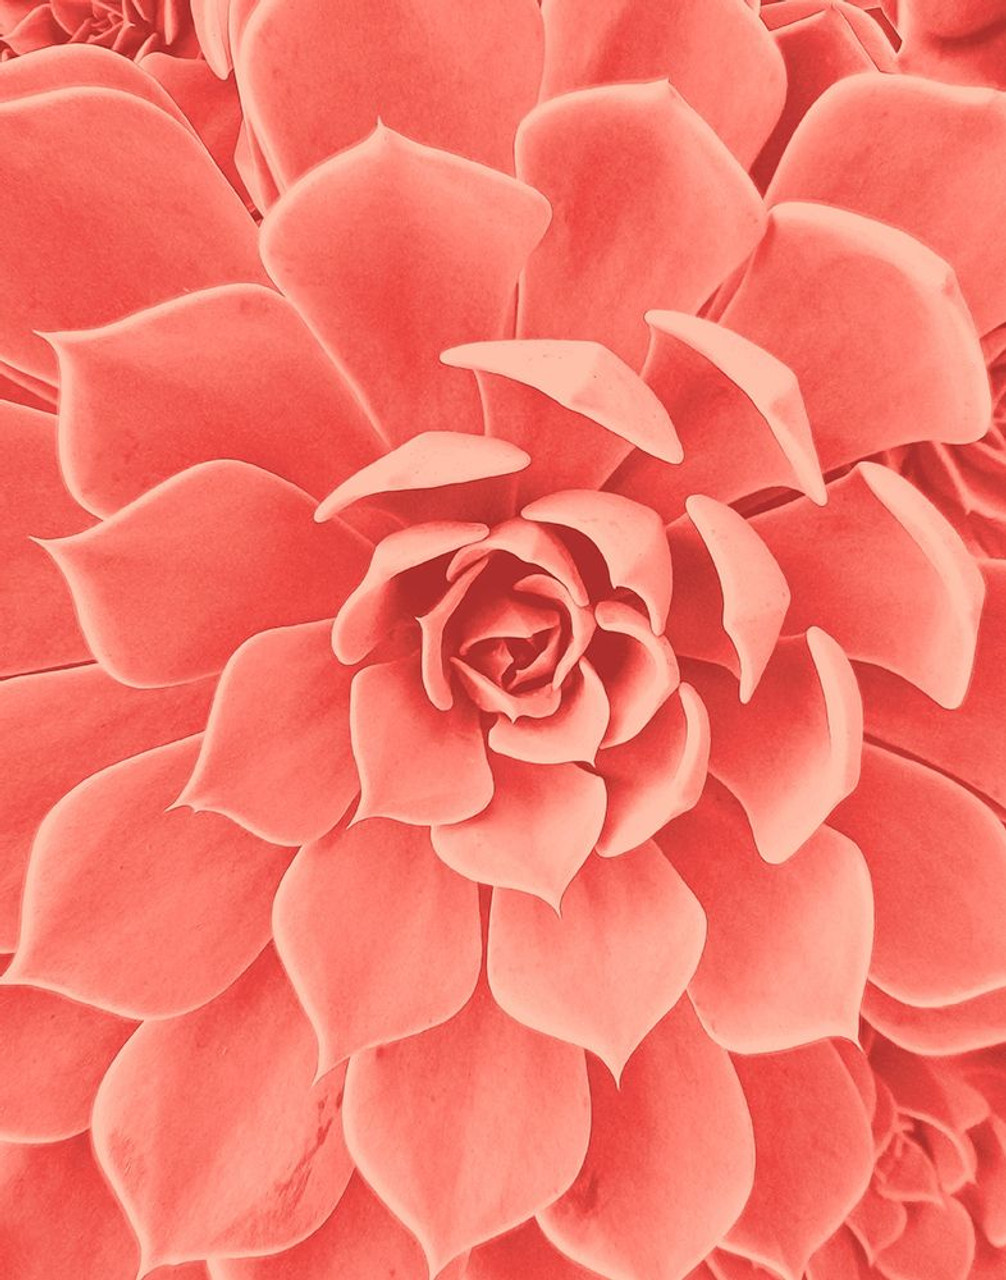 A coral colored flower with many petals - Coral